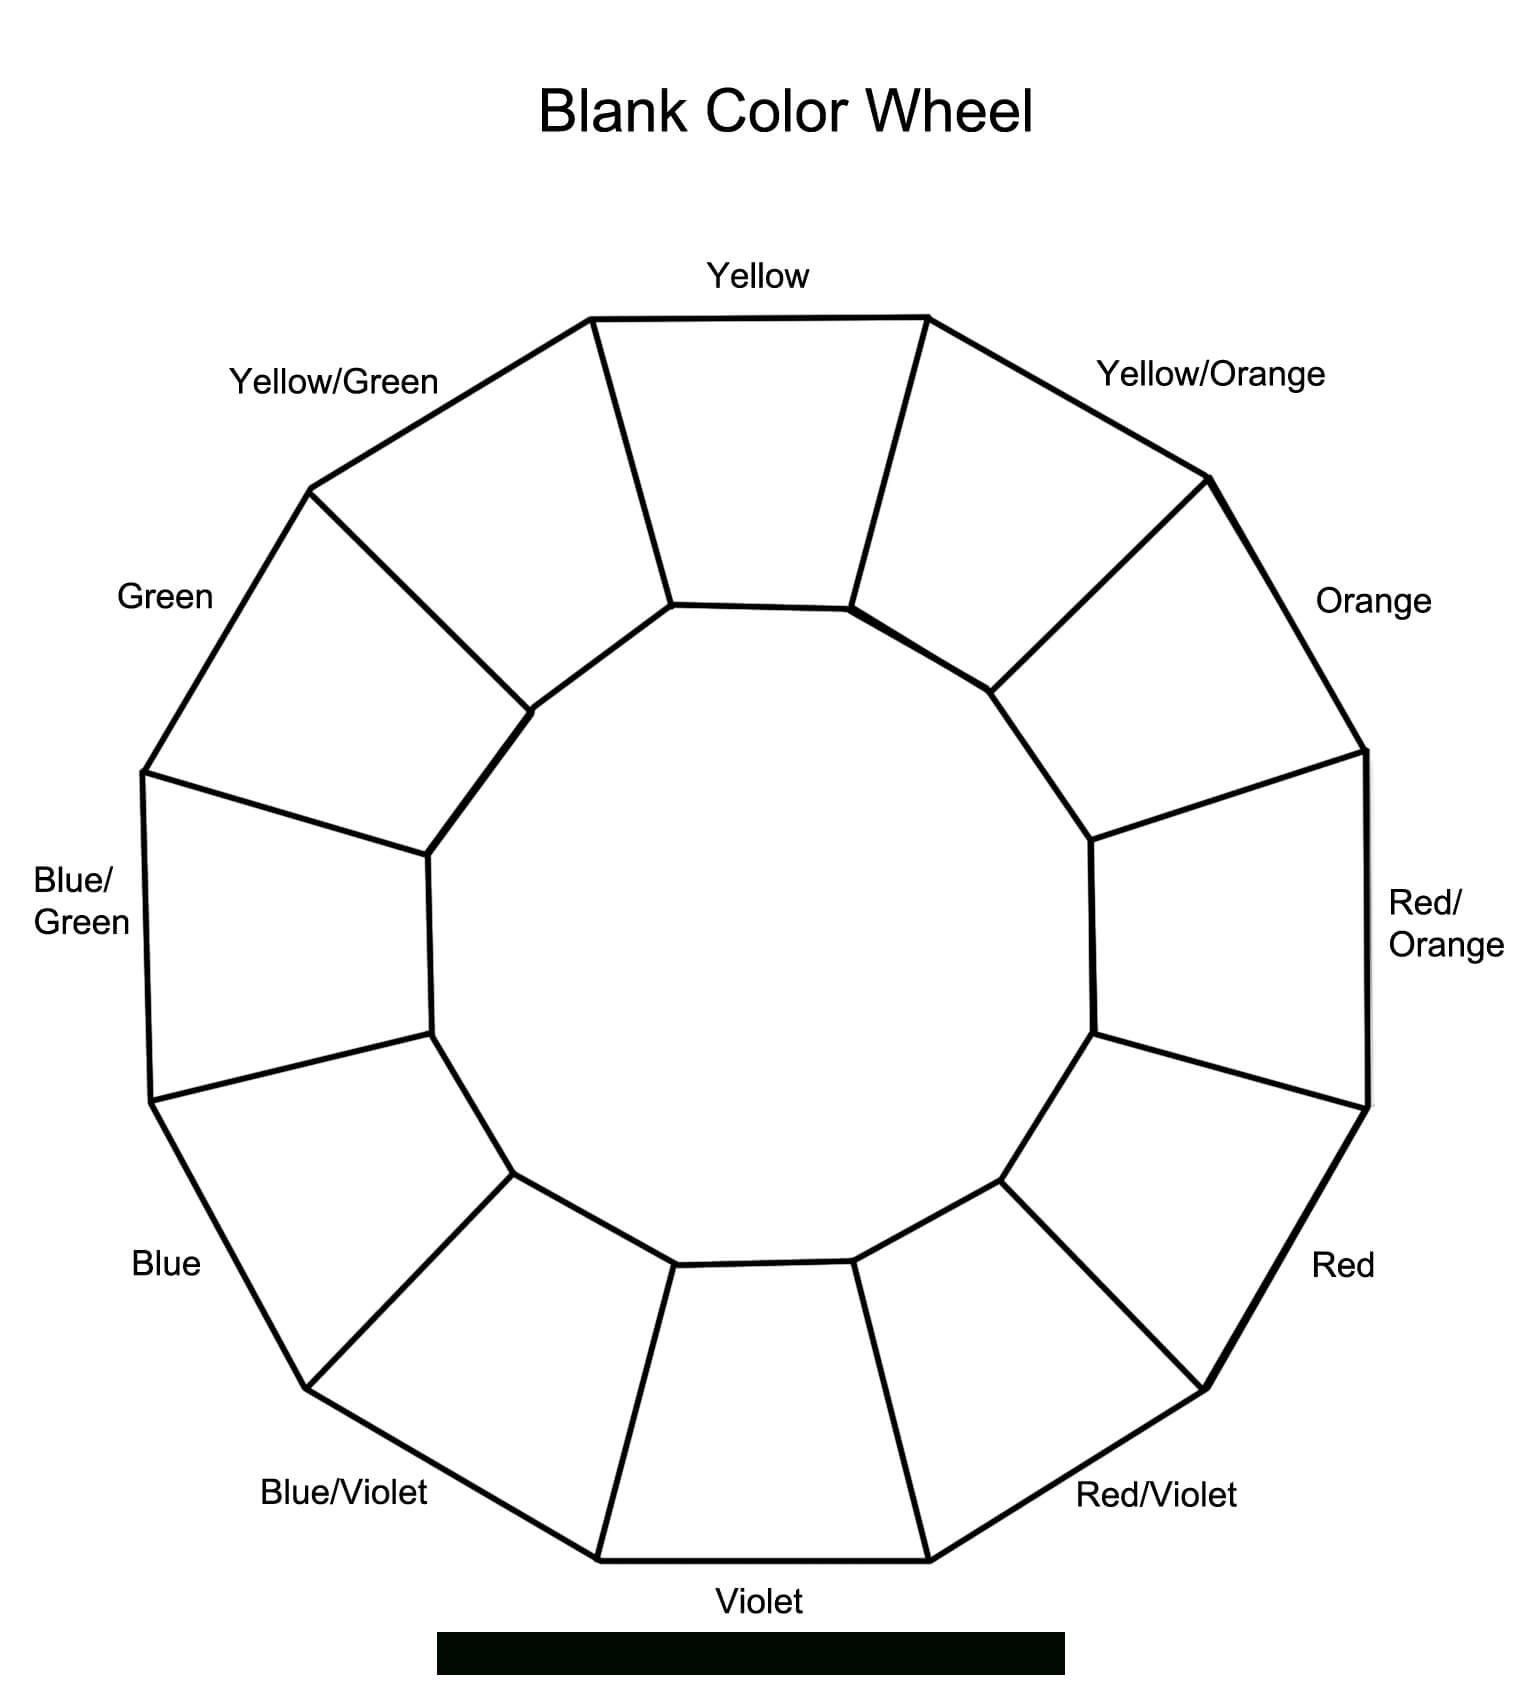 12 Section Colour Wheel | Free Pictures | Color Wheel Art Pertaining To Blank Color Wheel Template